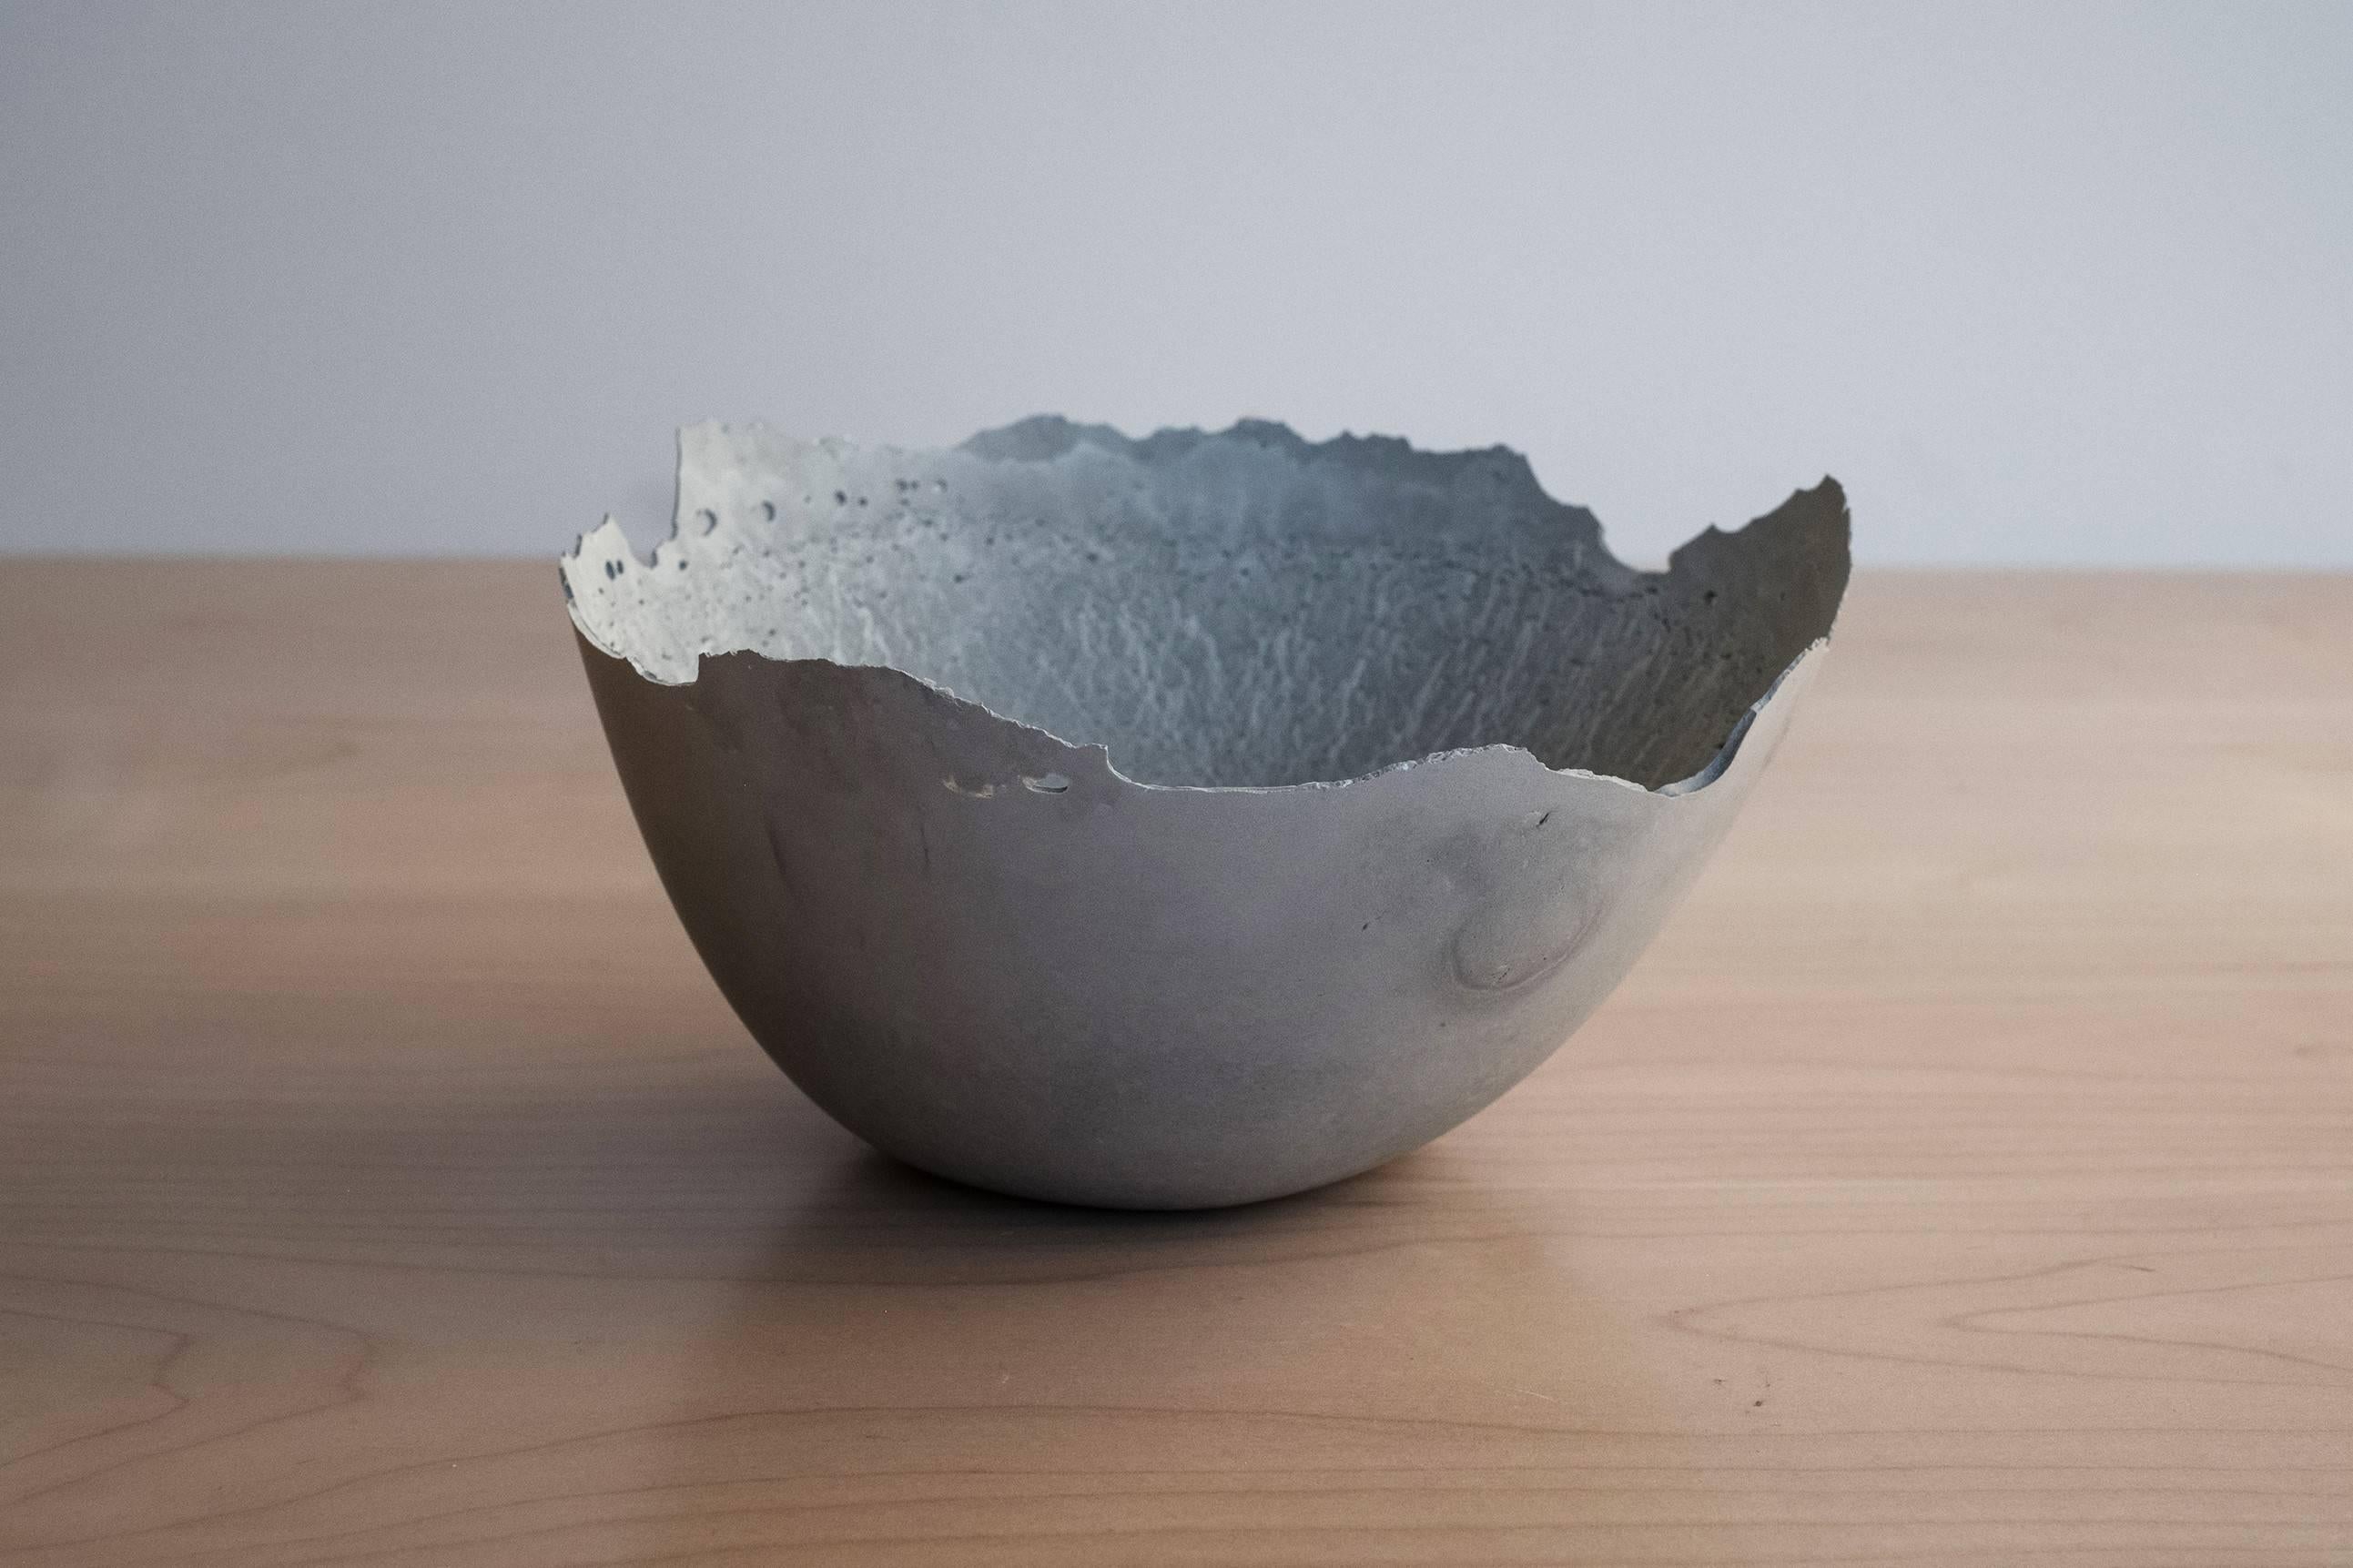 A collection of 200 unique bowls, the Concrete series by UMÉ Studio expresses the tension between heavy concrete and its delicate edge generated by hand pouring. While one assumes concrete should be strong and durable, it is, at its core, fragile.